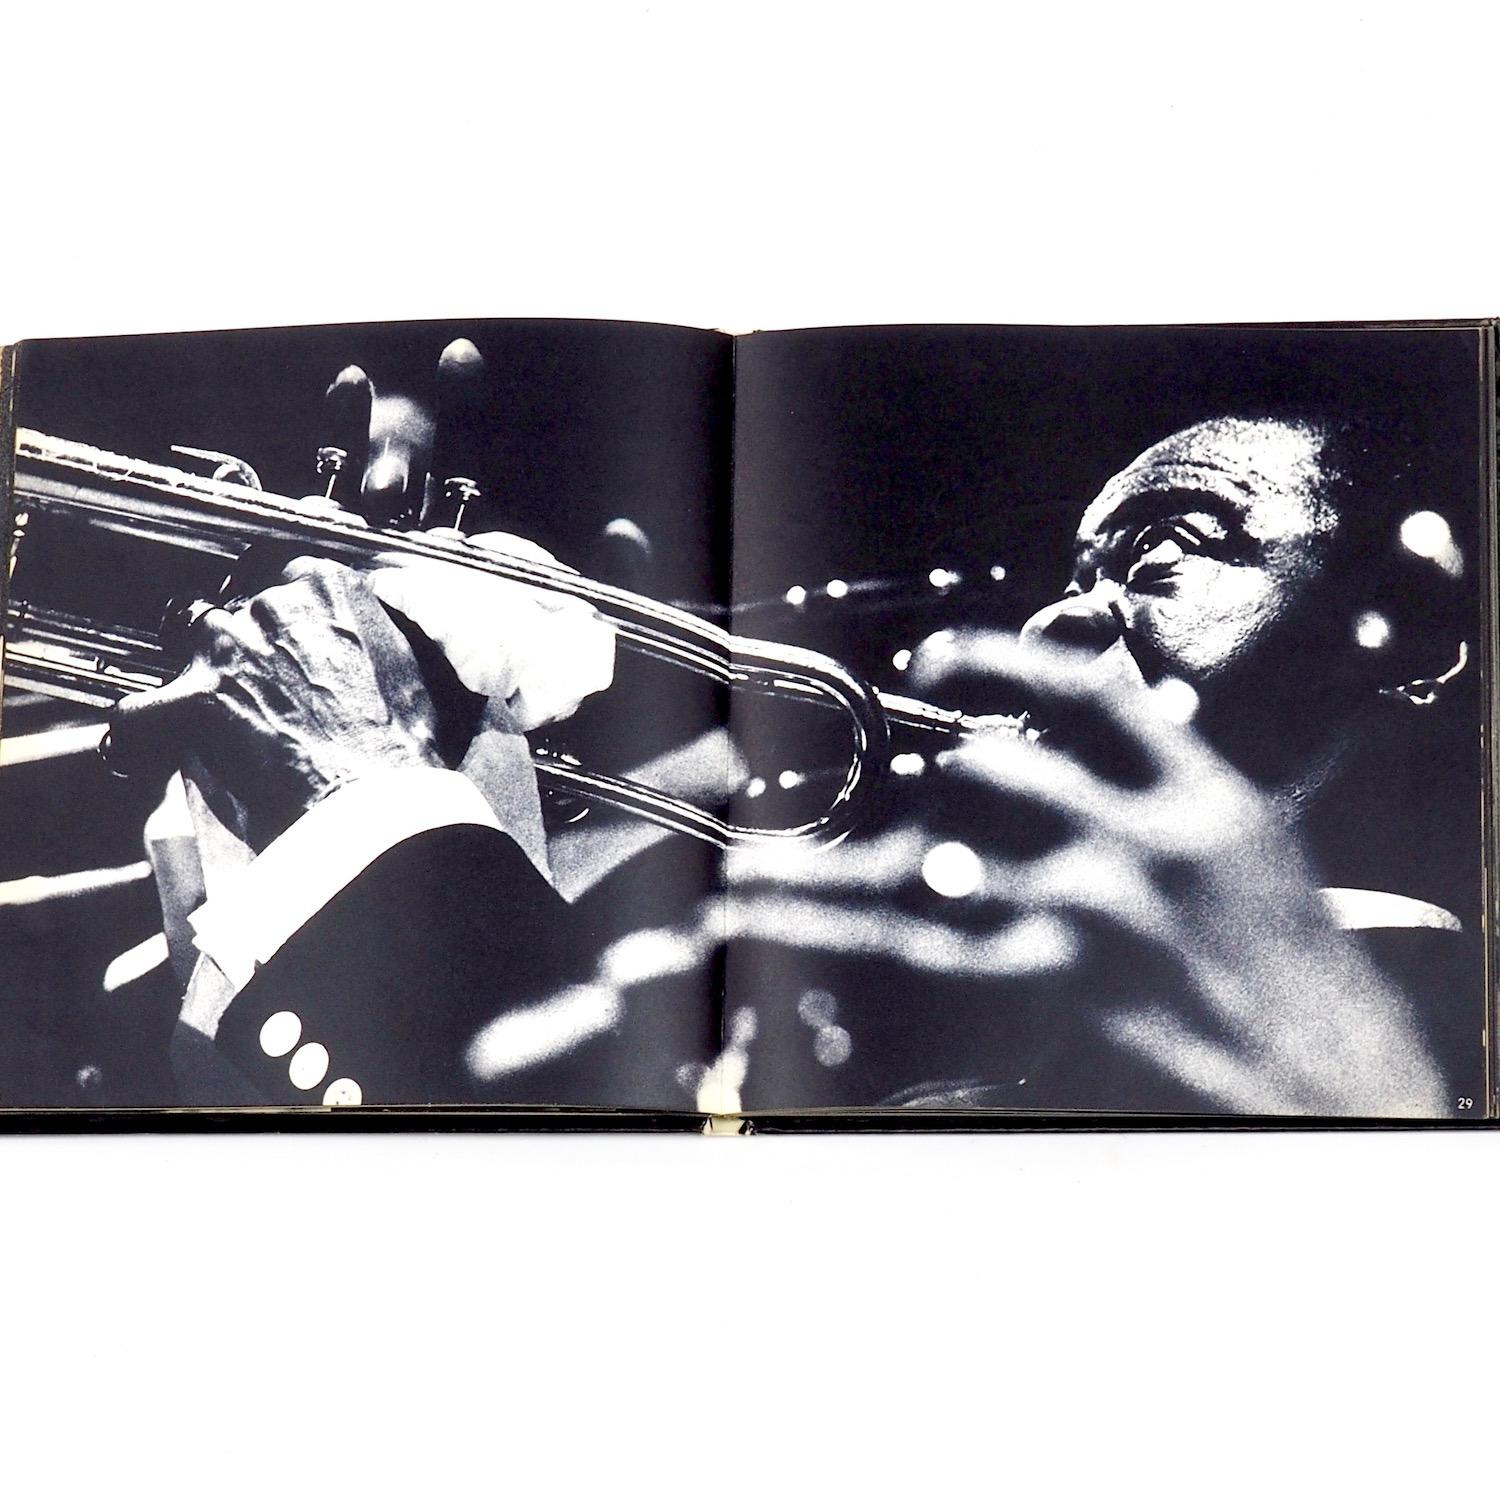 Ed Van Der Elsken. Jazz. Signed First Edition. De Nederlandse Boekenclub, Den Haag, 1959. Signed by author to half title. Rare first edition. 

This book is an extraordinary record of Jazz history, by an extraordinary photographer. Photos of Miles